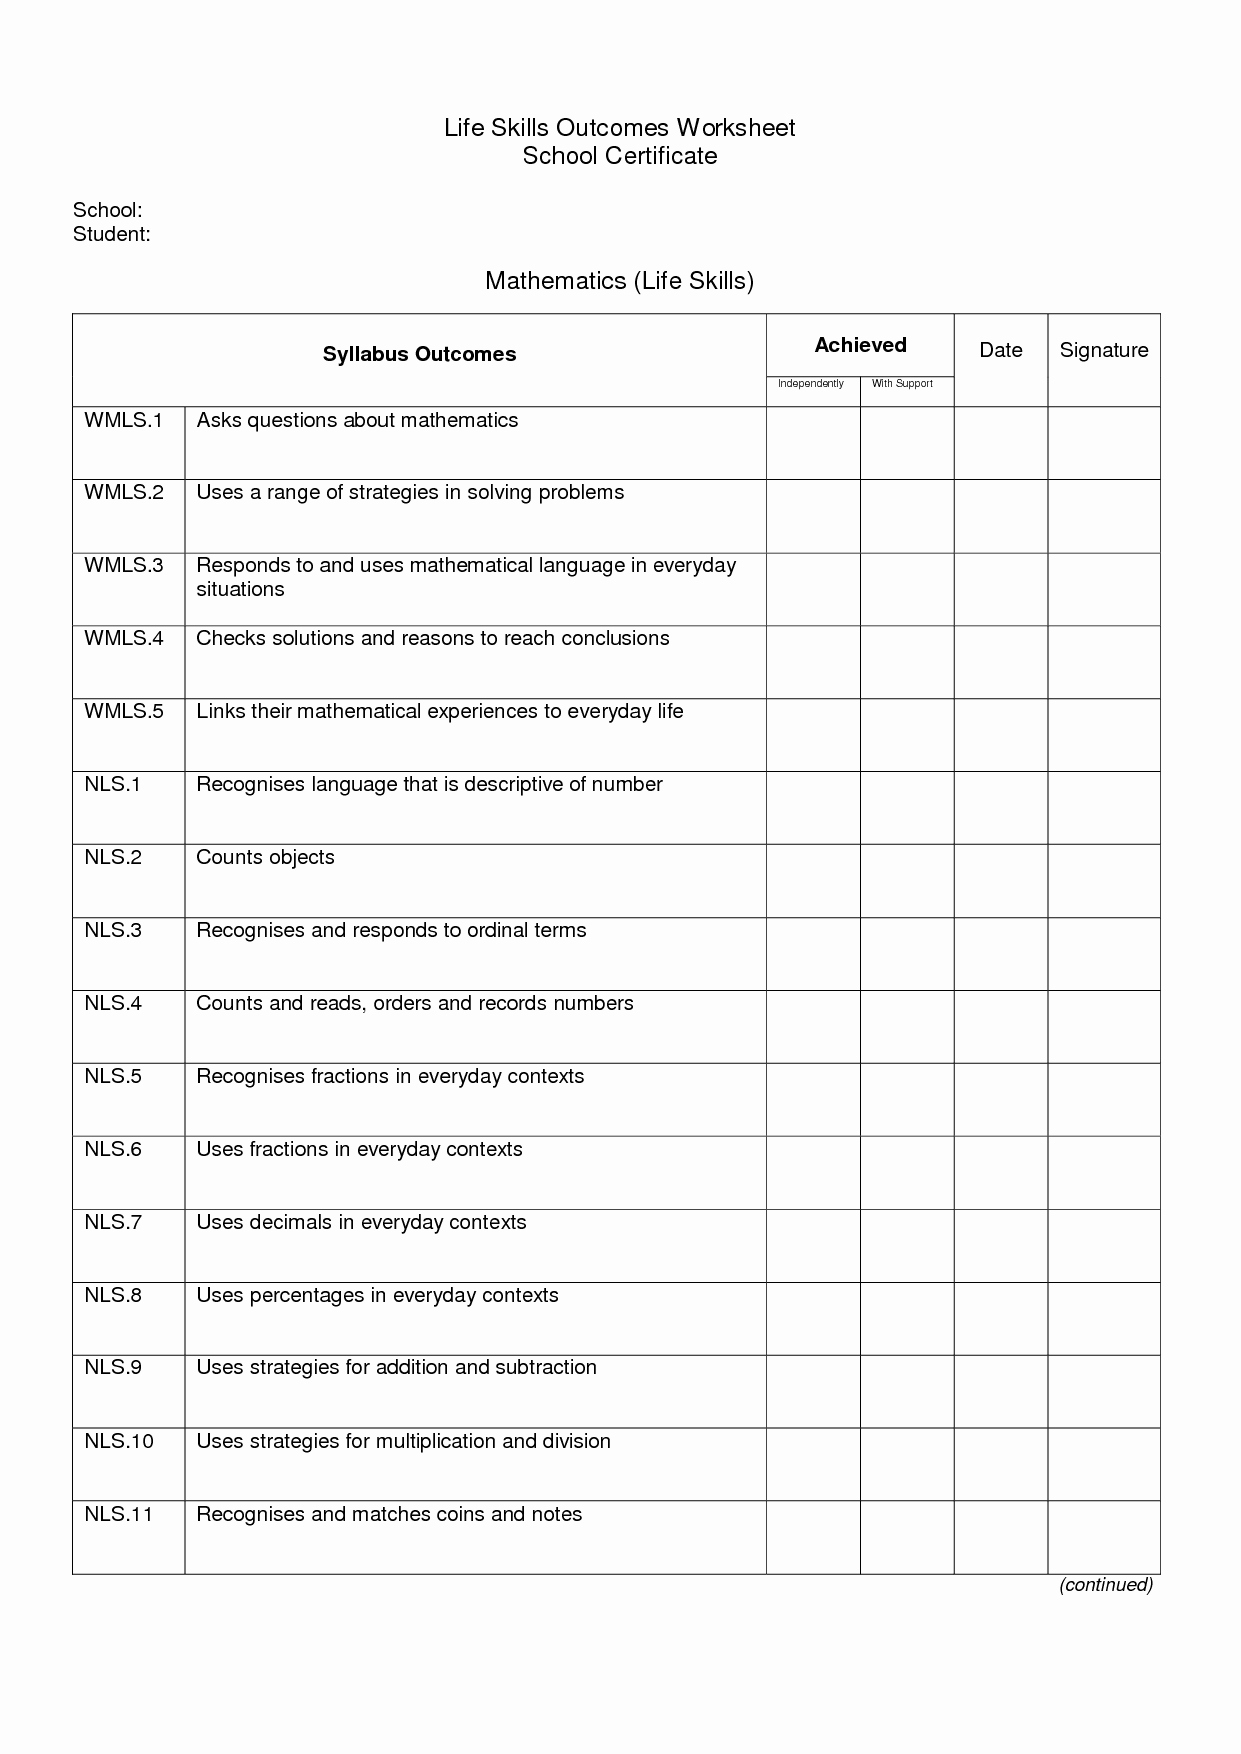 Free Life Skills Worksheets For Adults – Aggelies-Online.eu - Free Printable Life Skills Worksheets For Adults